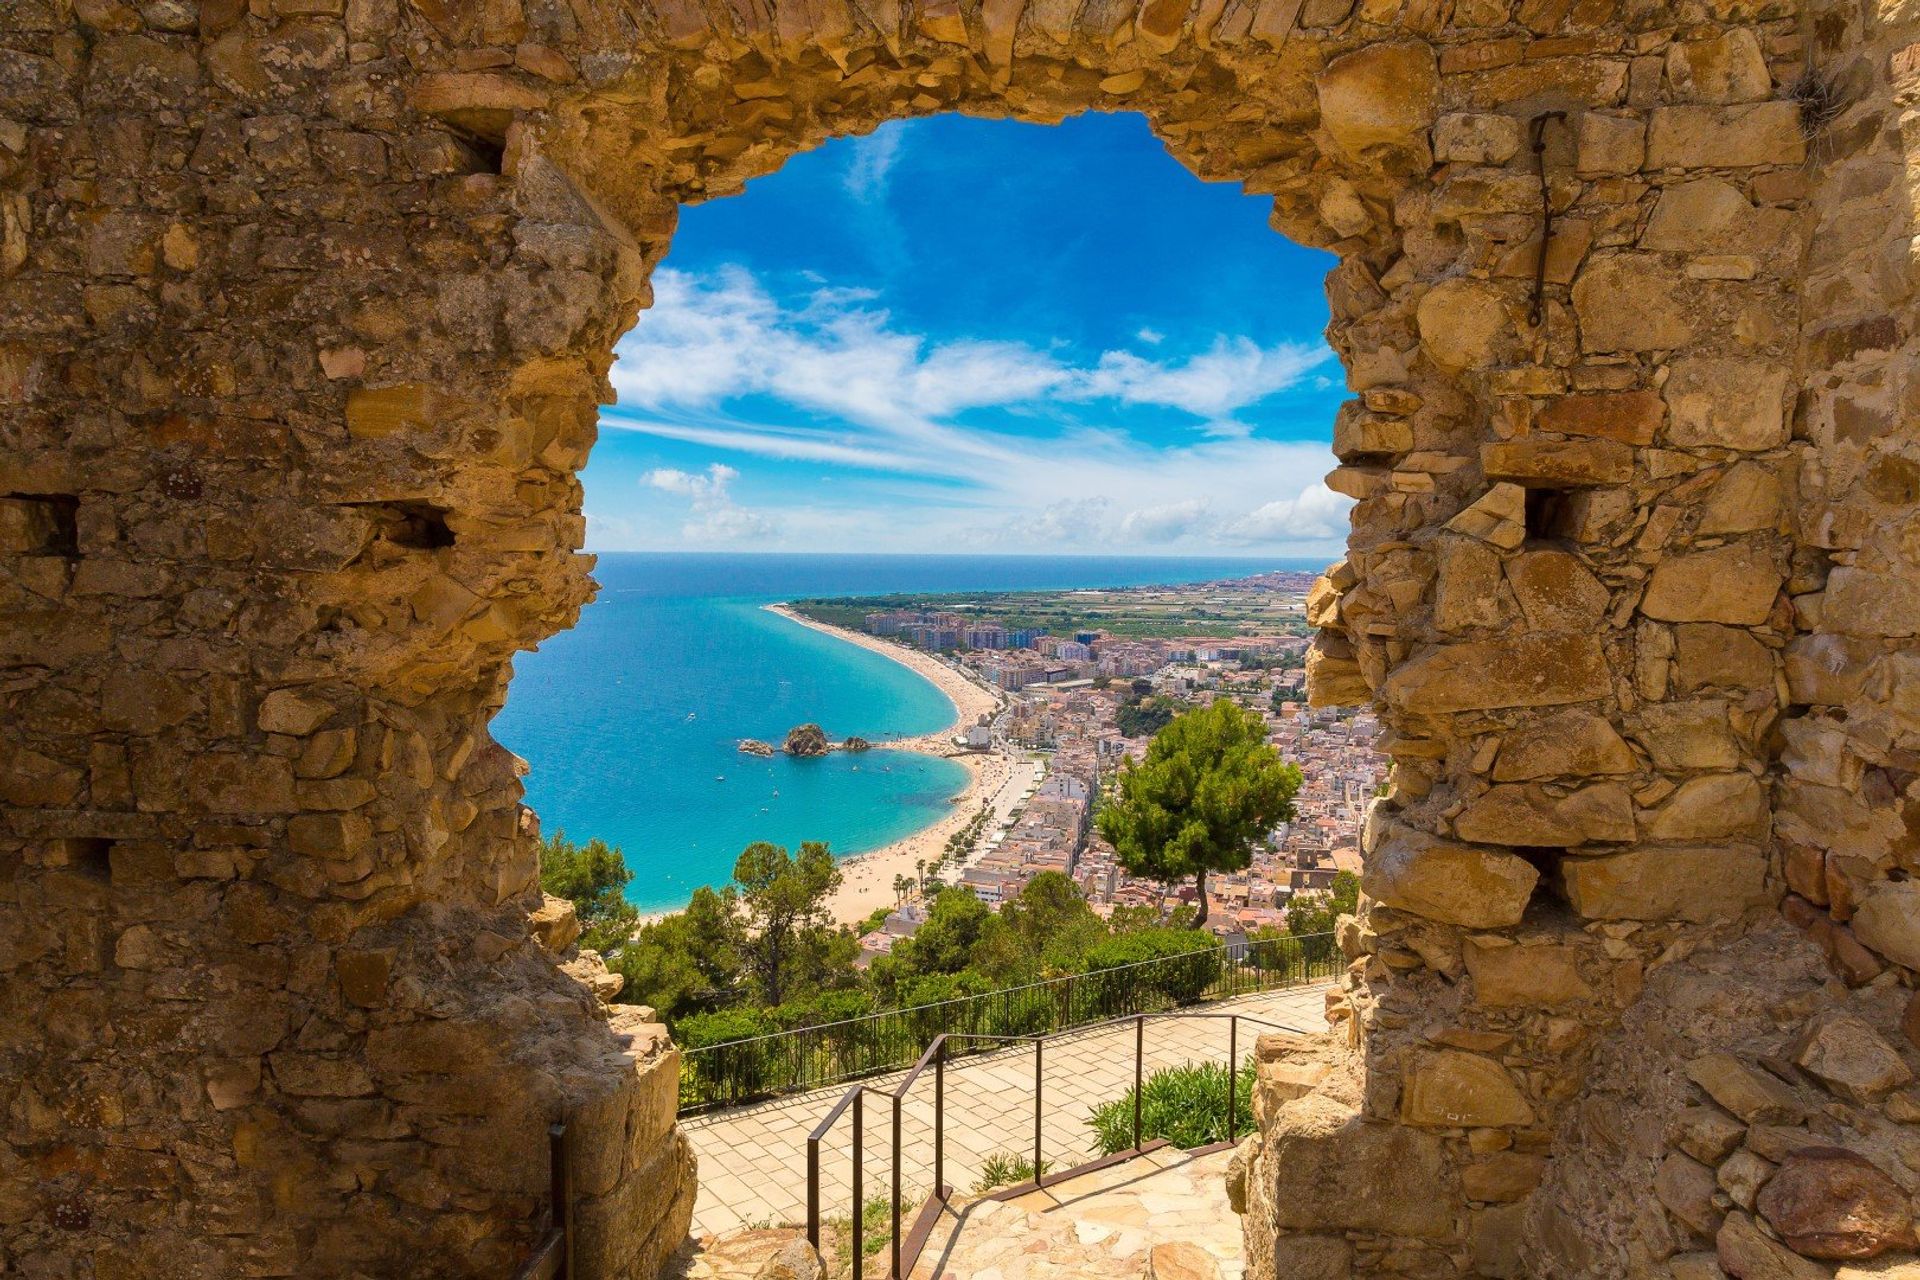 The gateway to the Costa Brava! Blanes and its surrounding landscape, seen through the wall of St. John Castle